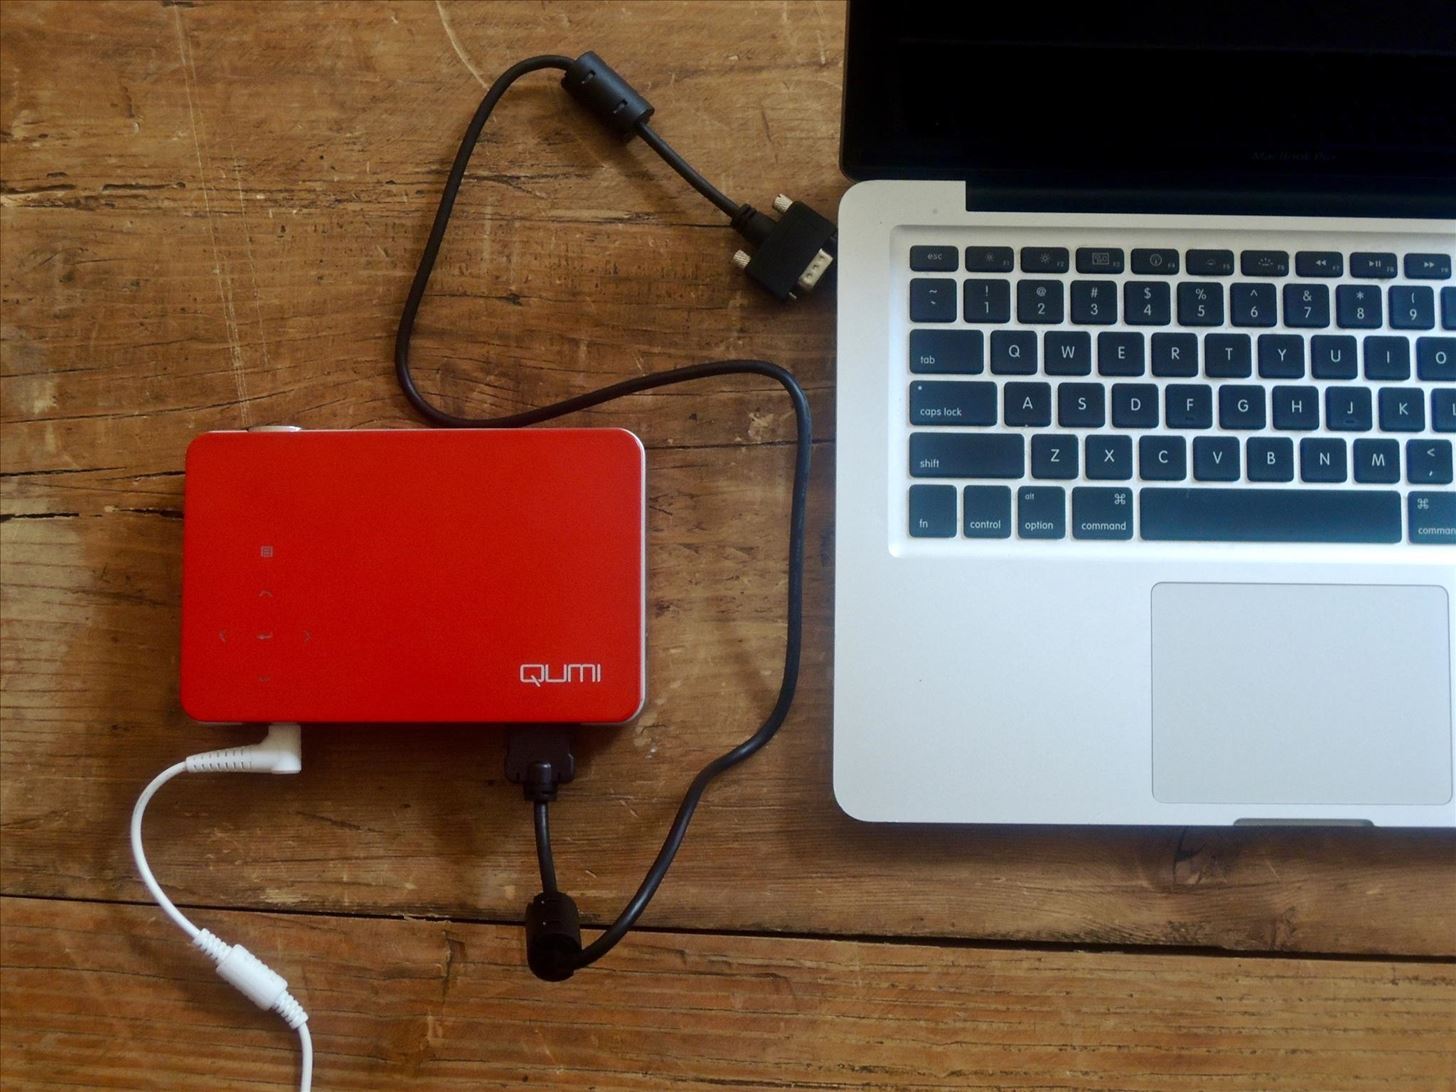 Review: The Qumi Q5 Pocket Projector Is a Solid On-the-Go Media Companion